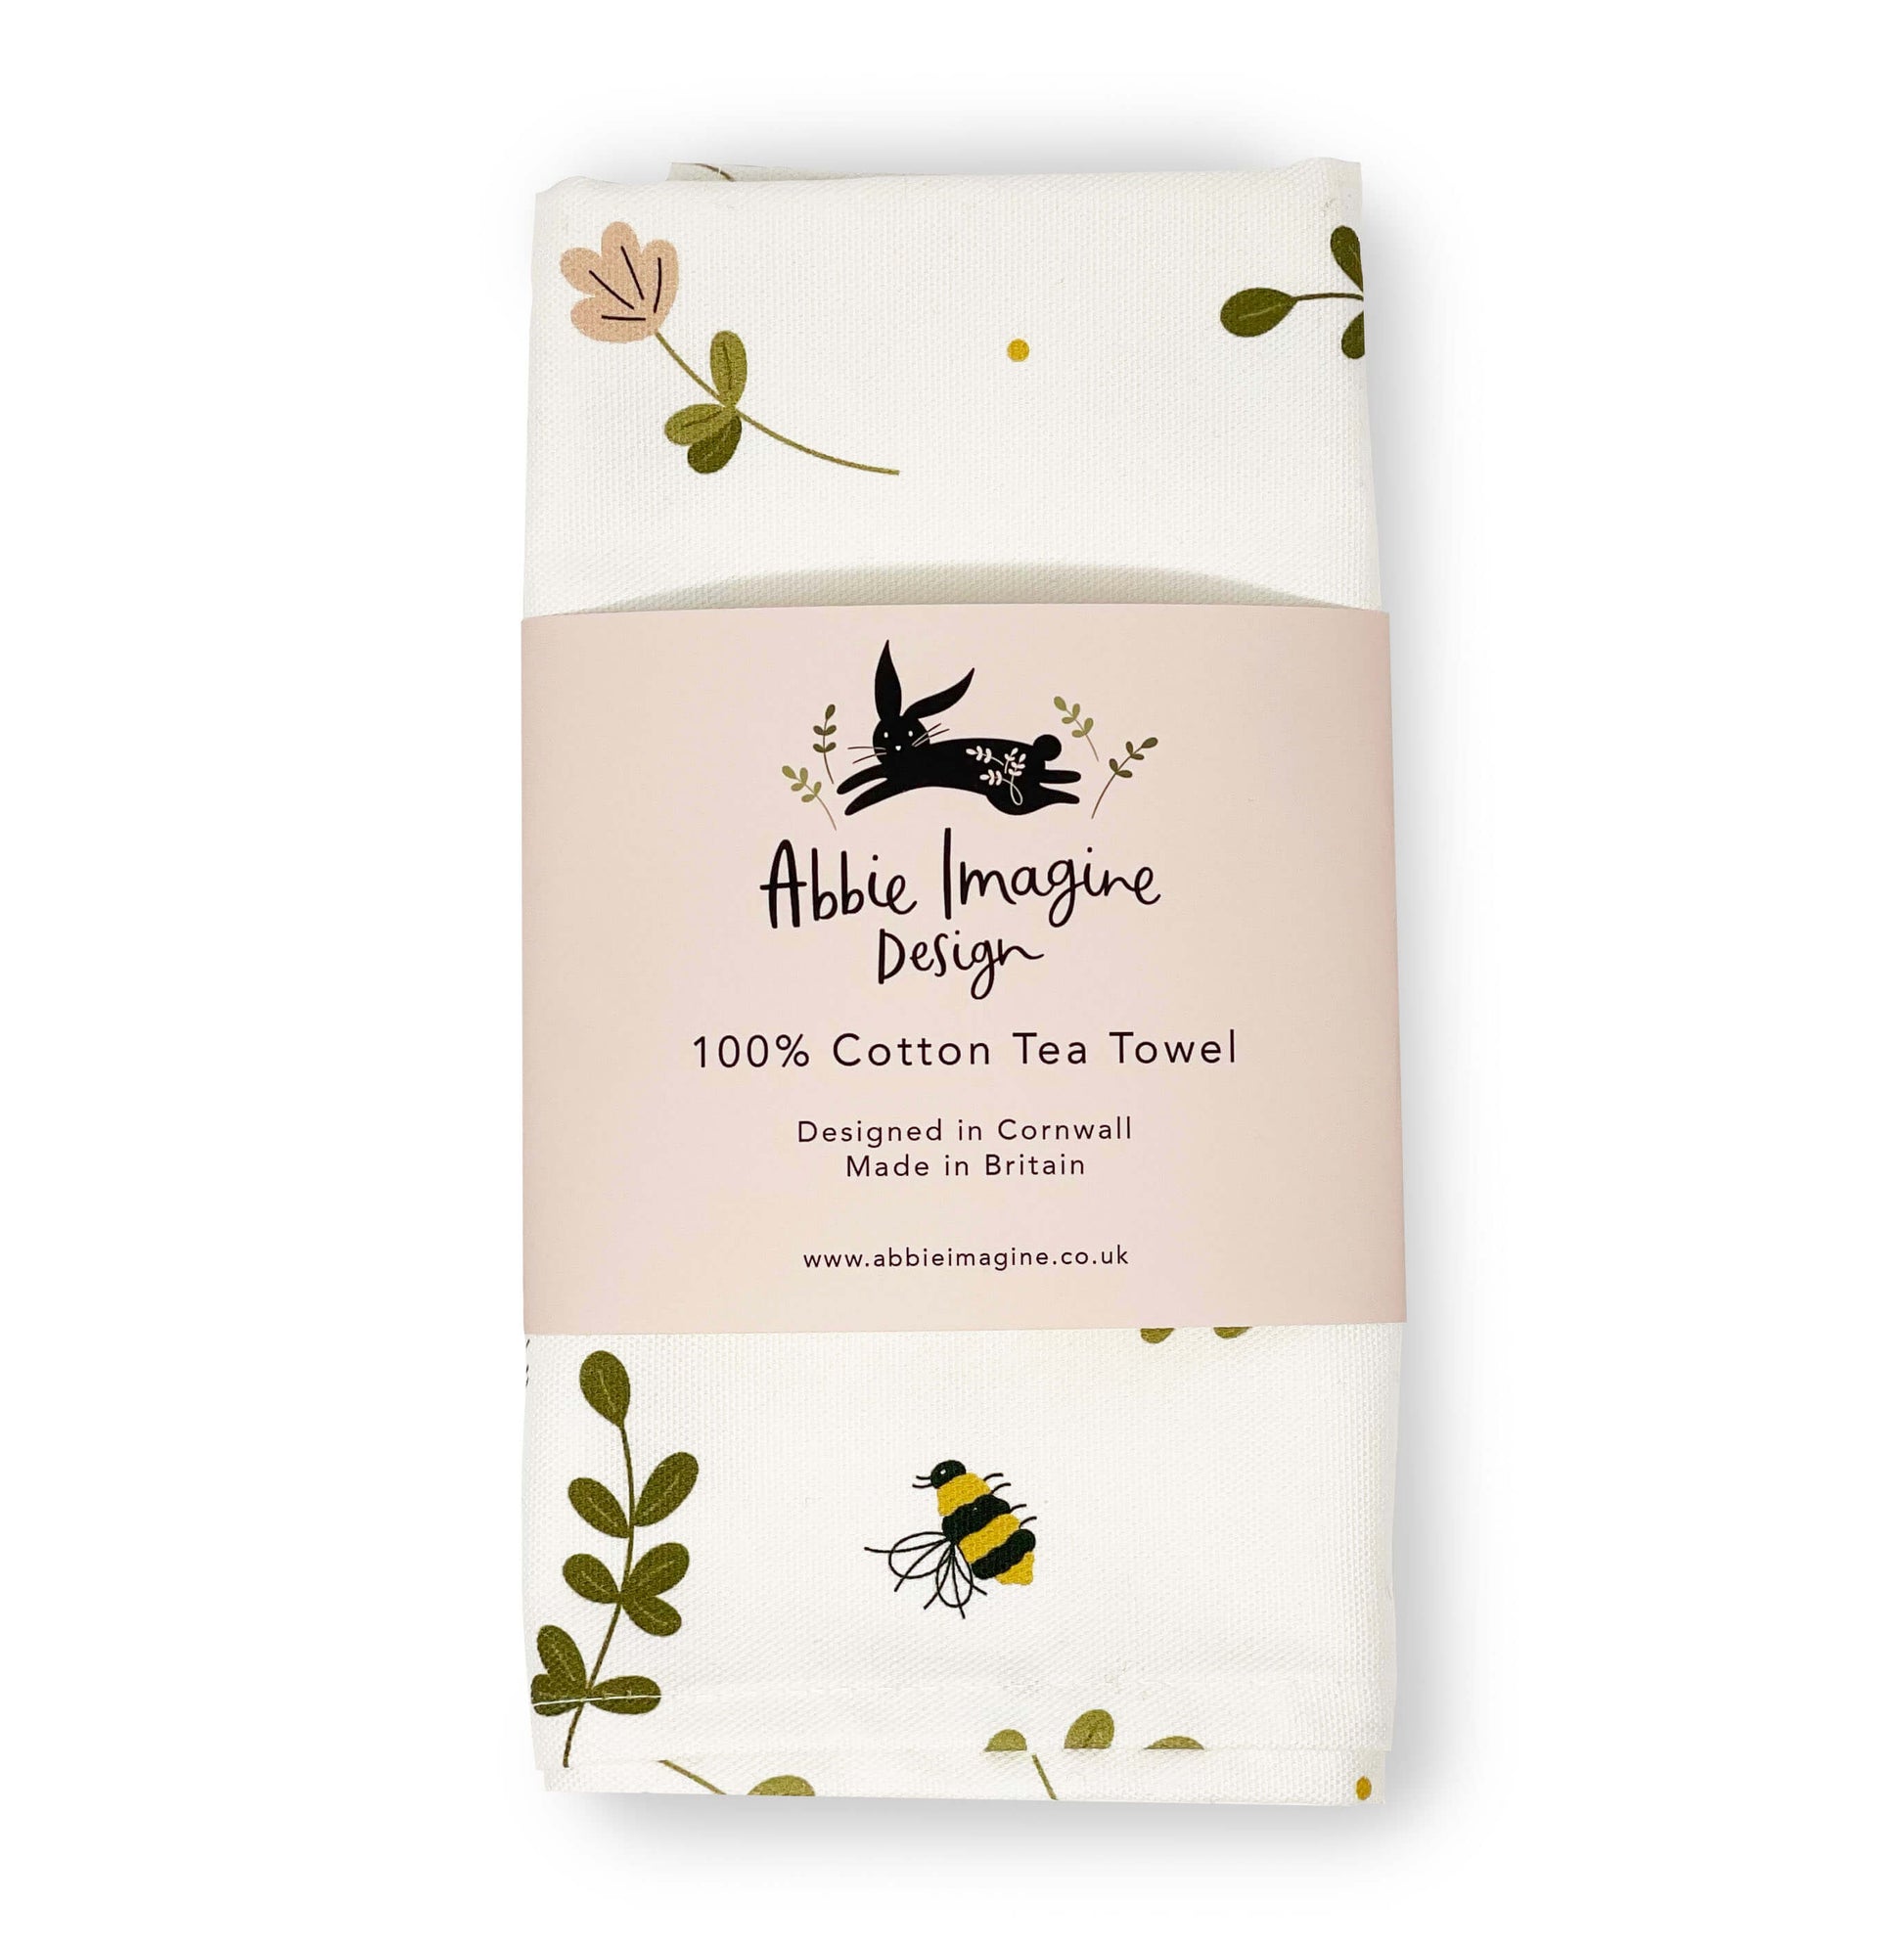 Packaging for Bees and flowers tea towel by Abbie Imagine